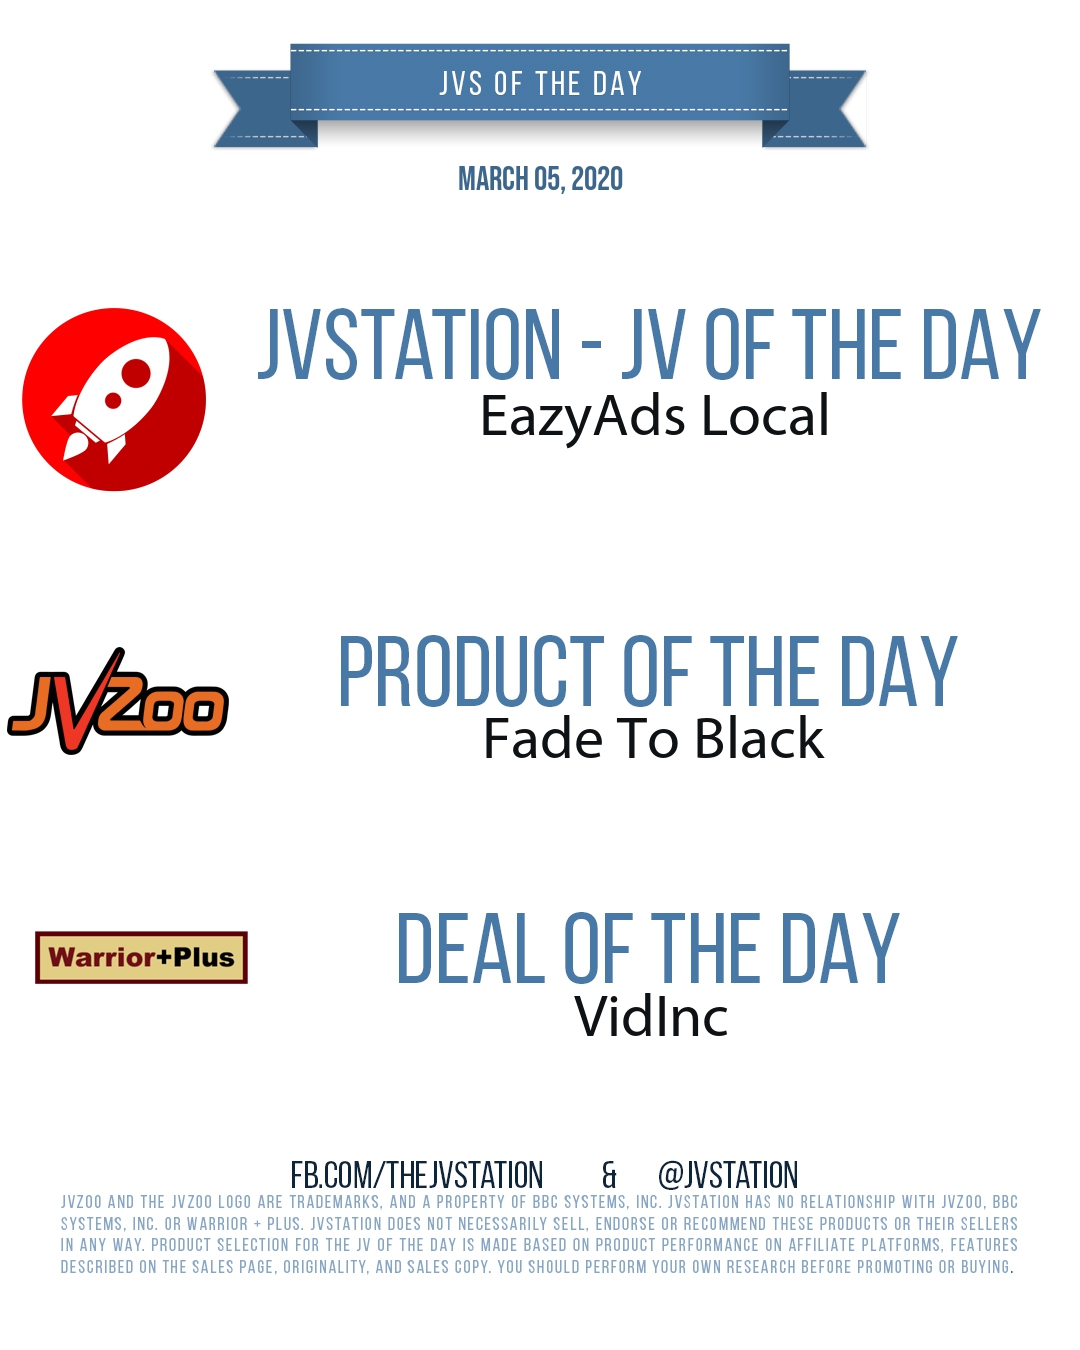 JVs of the day - March 05, 2020